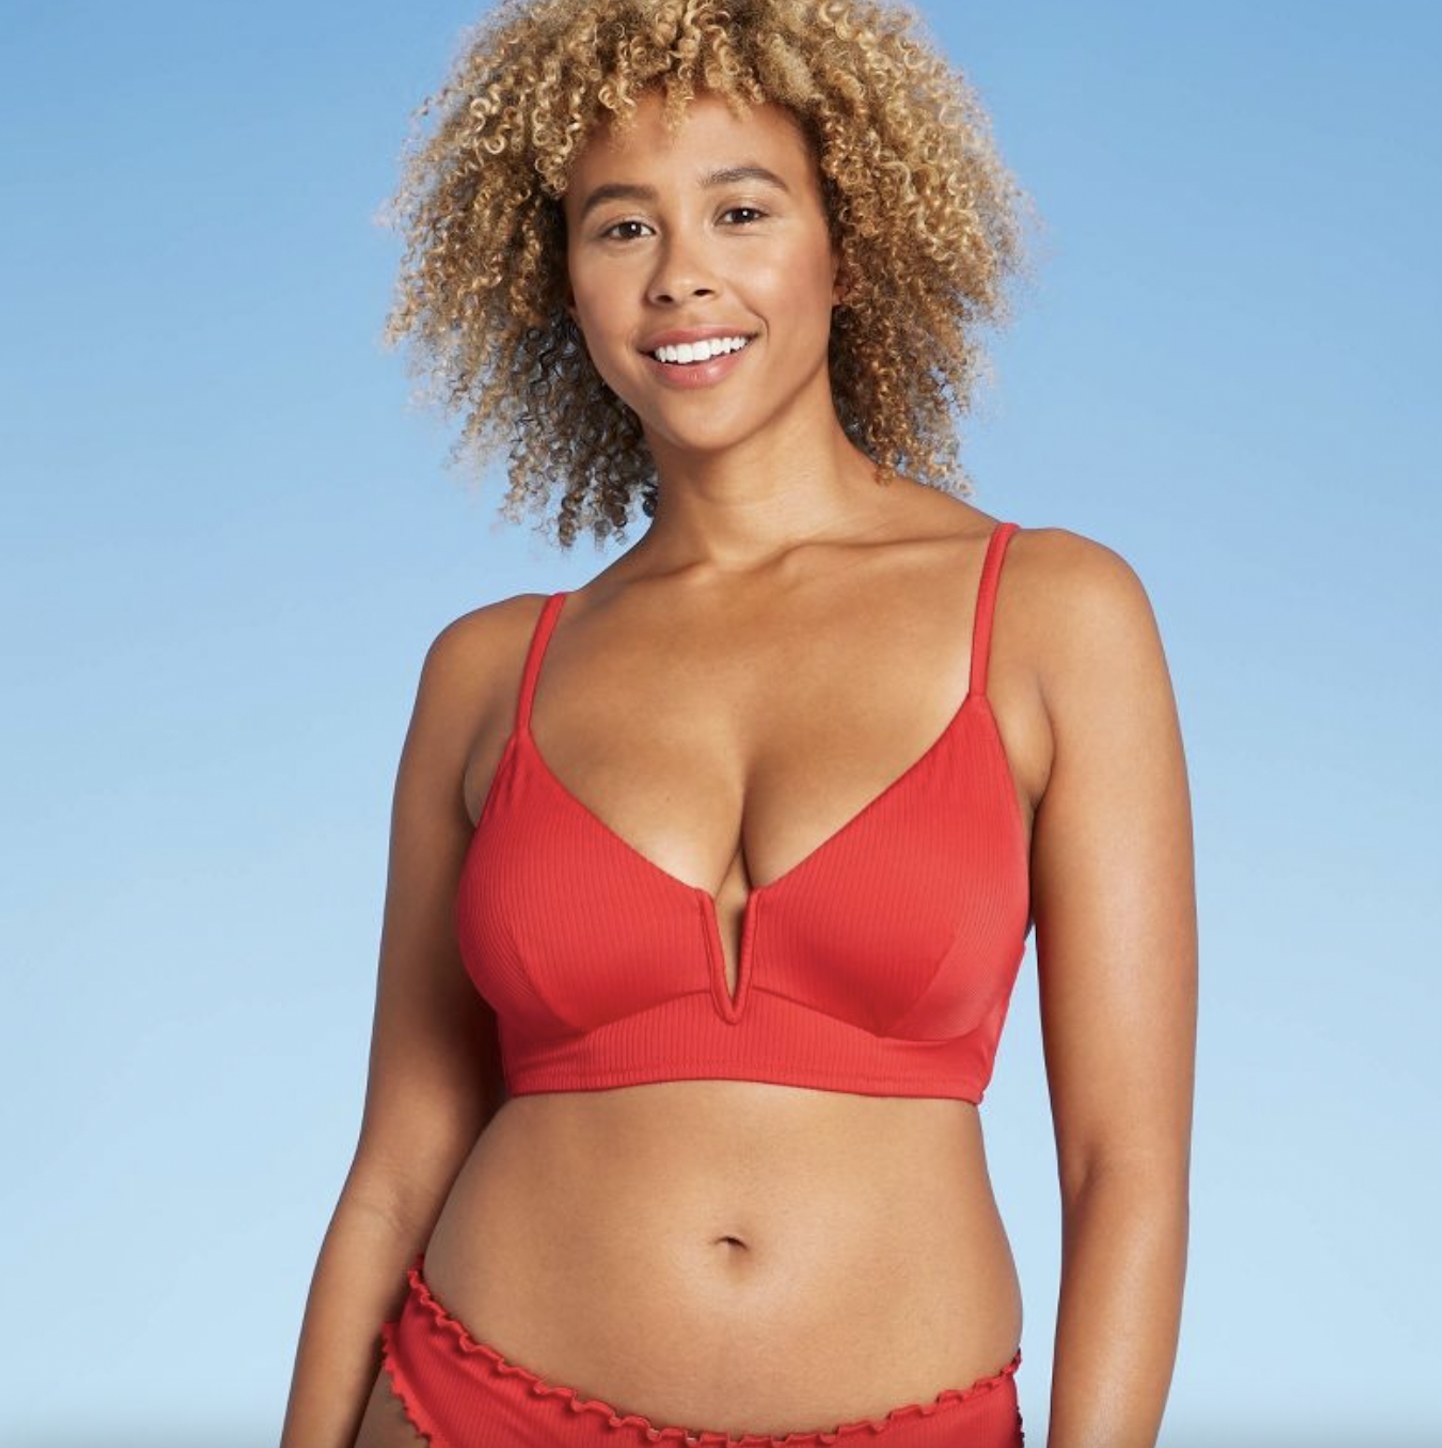 A person wearing a red bikini top with a matching bottom